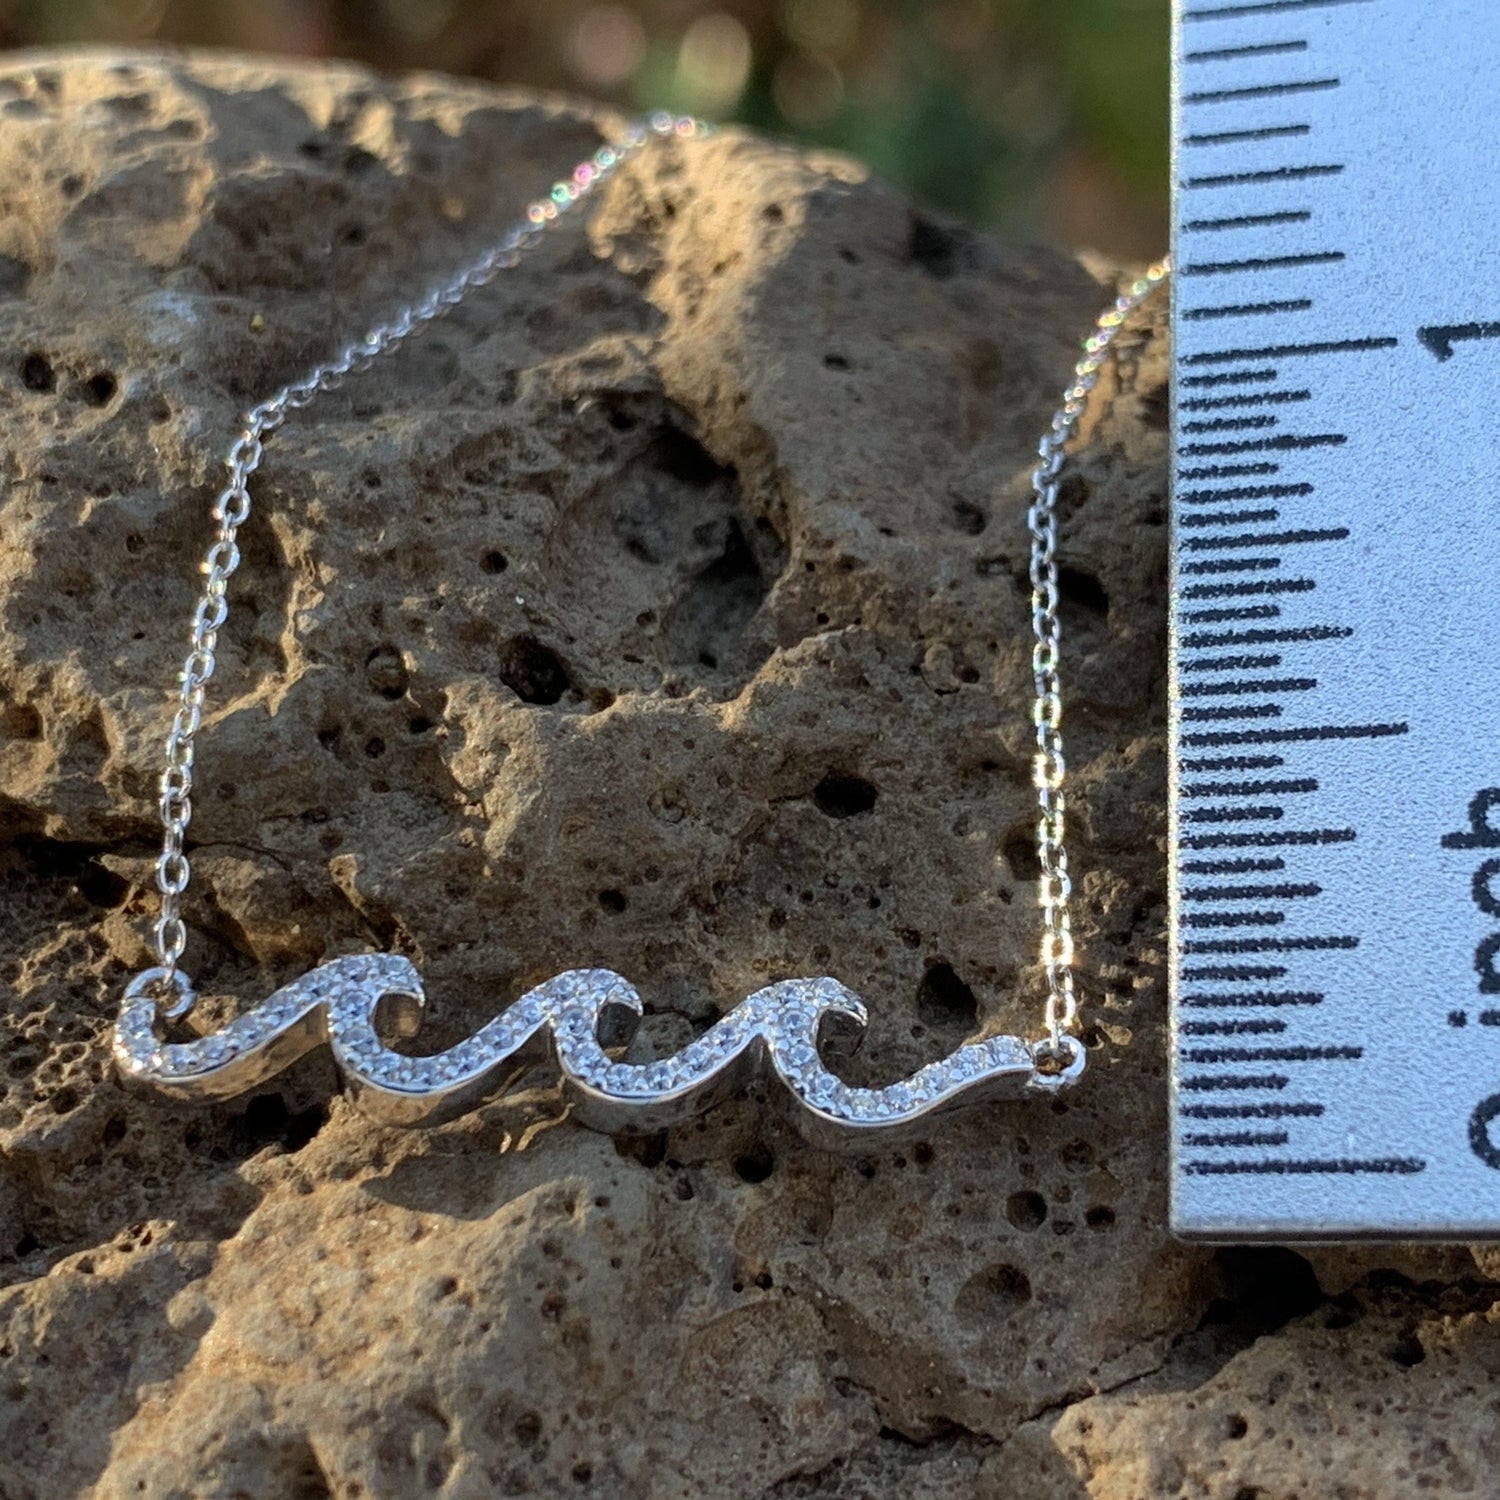 Crystal waves pendant in white caps with ruler measuring one inch.